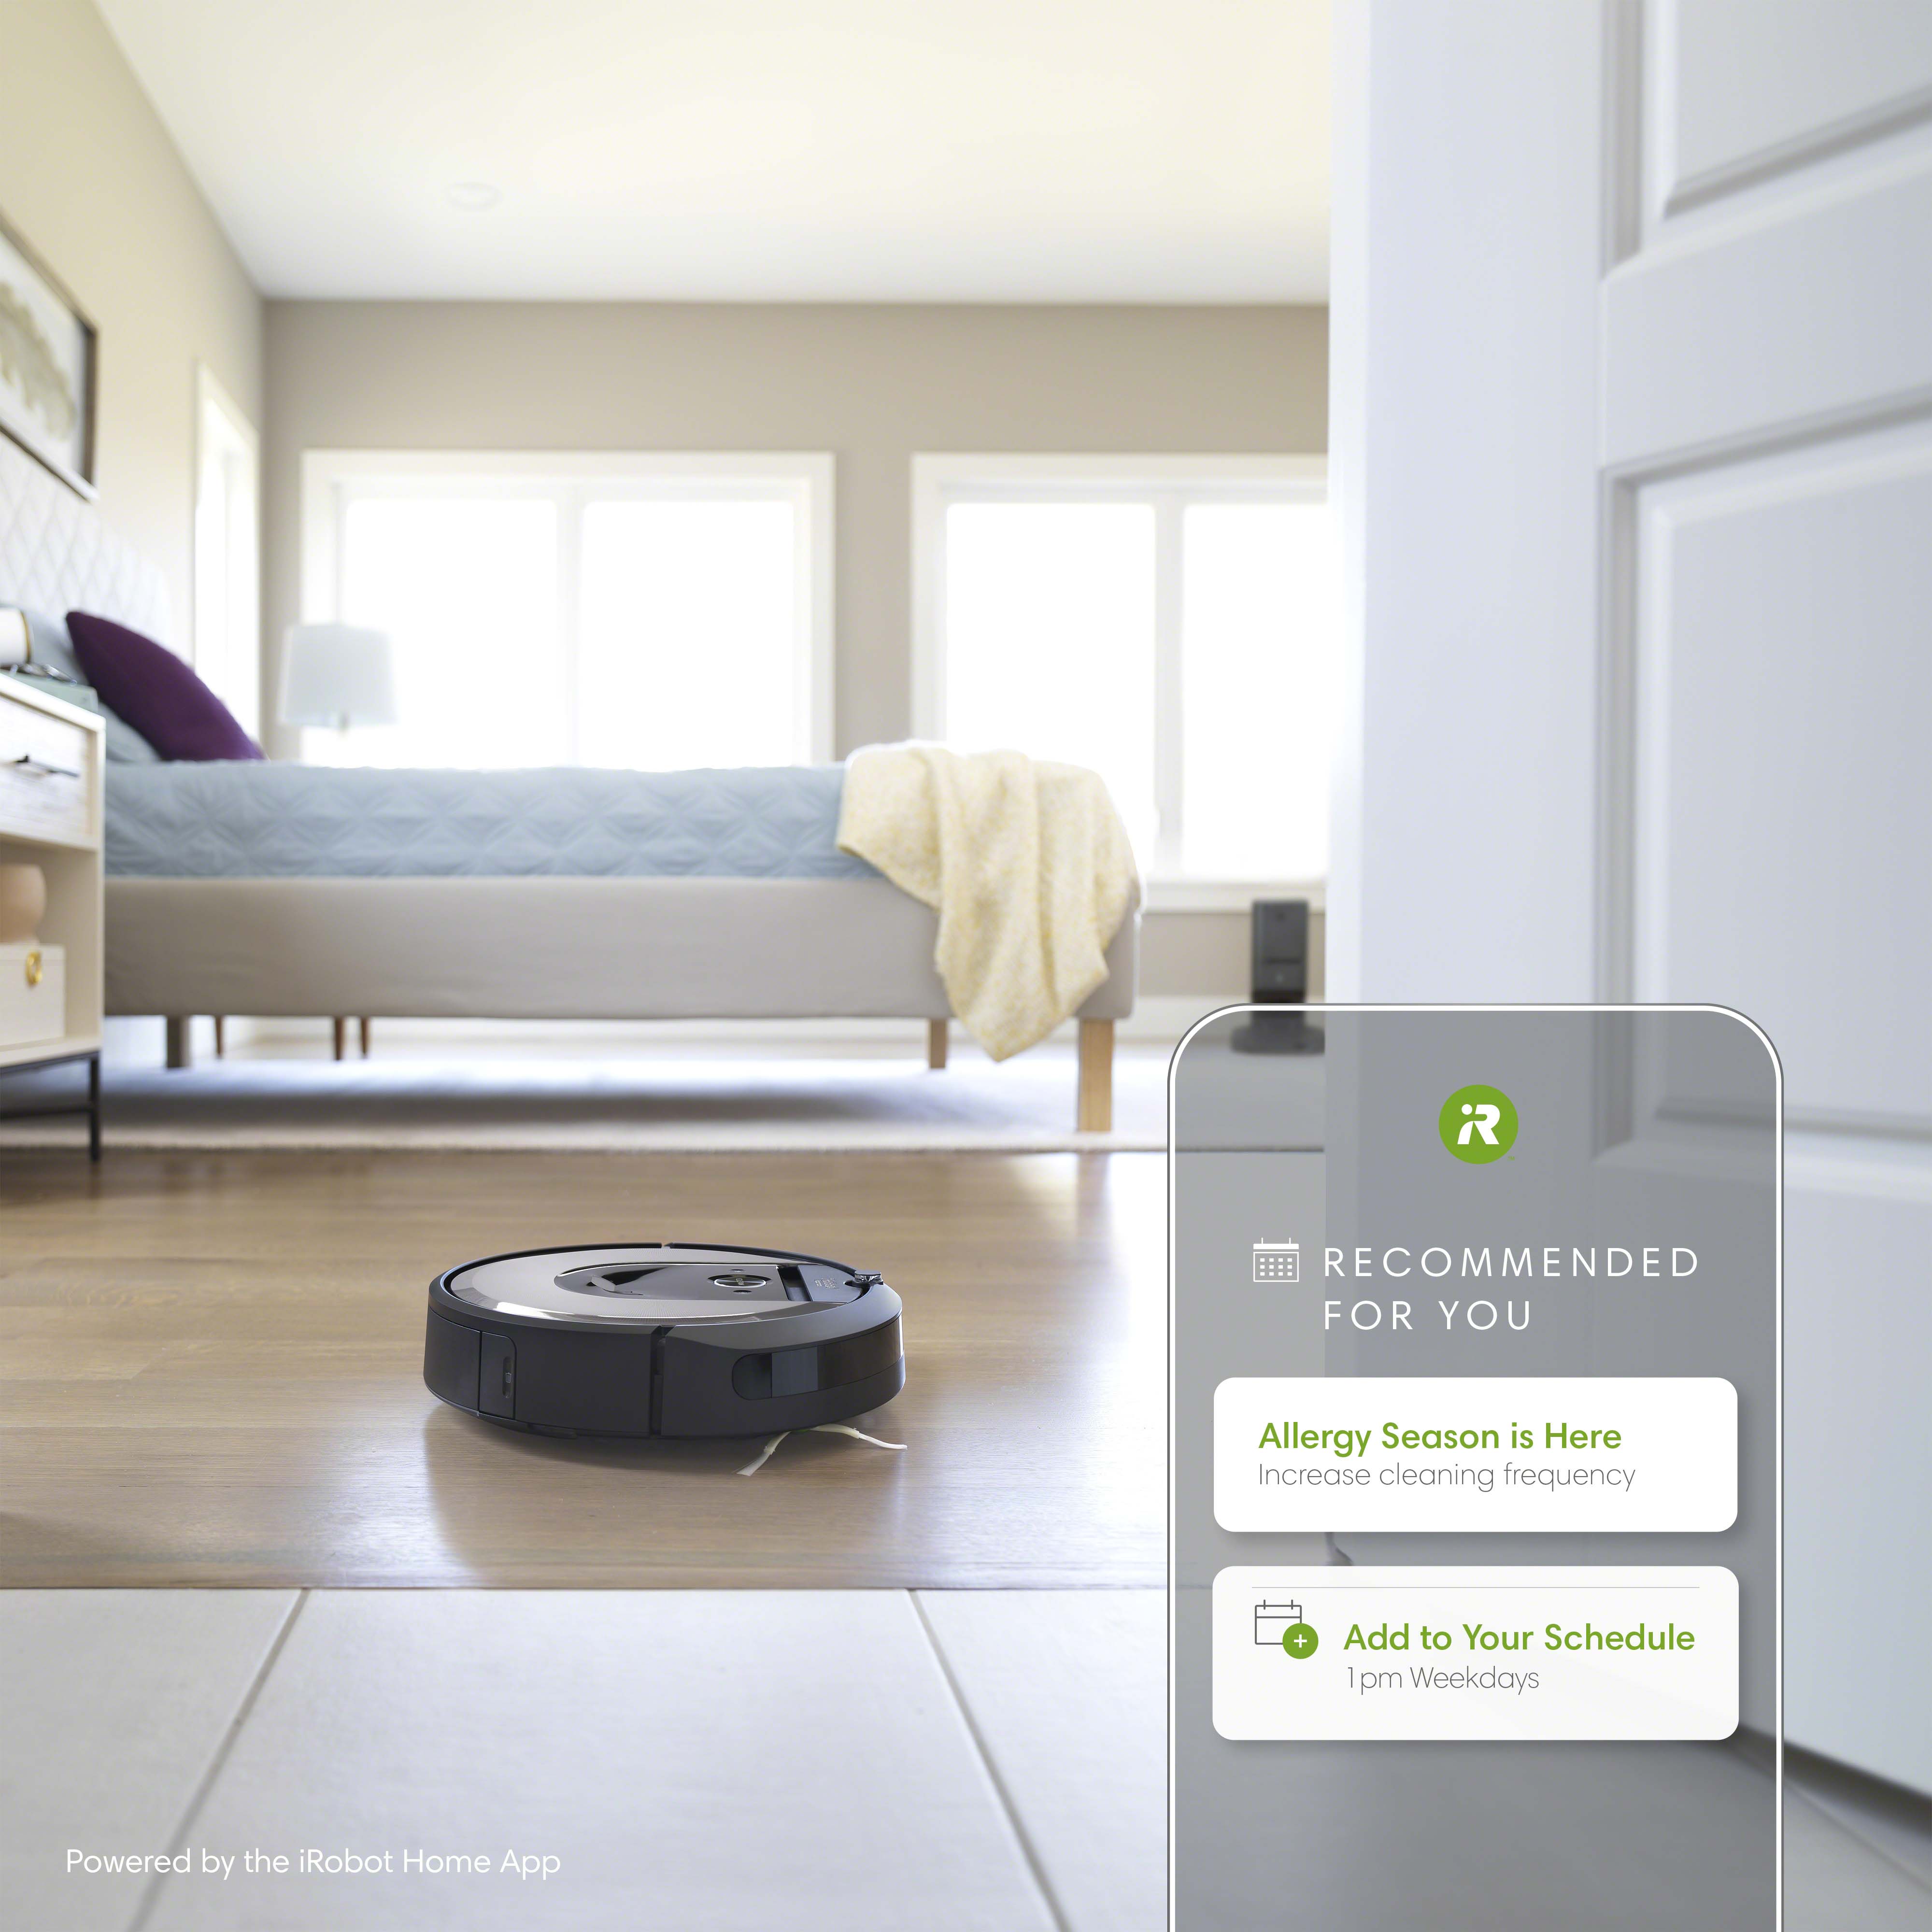 iRobot Roomba i7 (7150) Robot Vacuum- Wi-Fi Connected, Smart Mapping, Works with Google Home, Ideal for Pet Hair, Carpets, Hard Floors - image 7 of 16